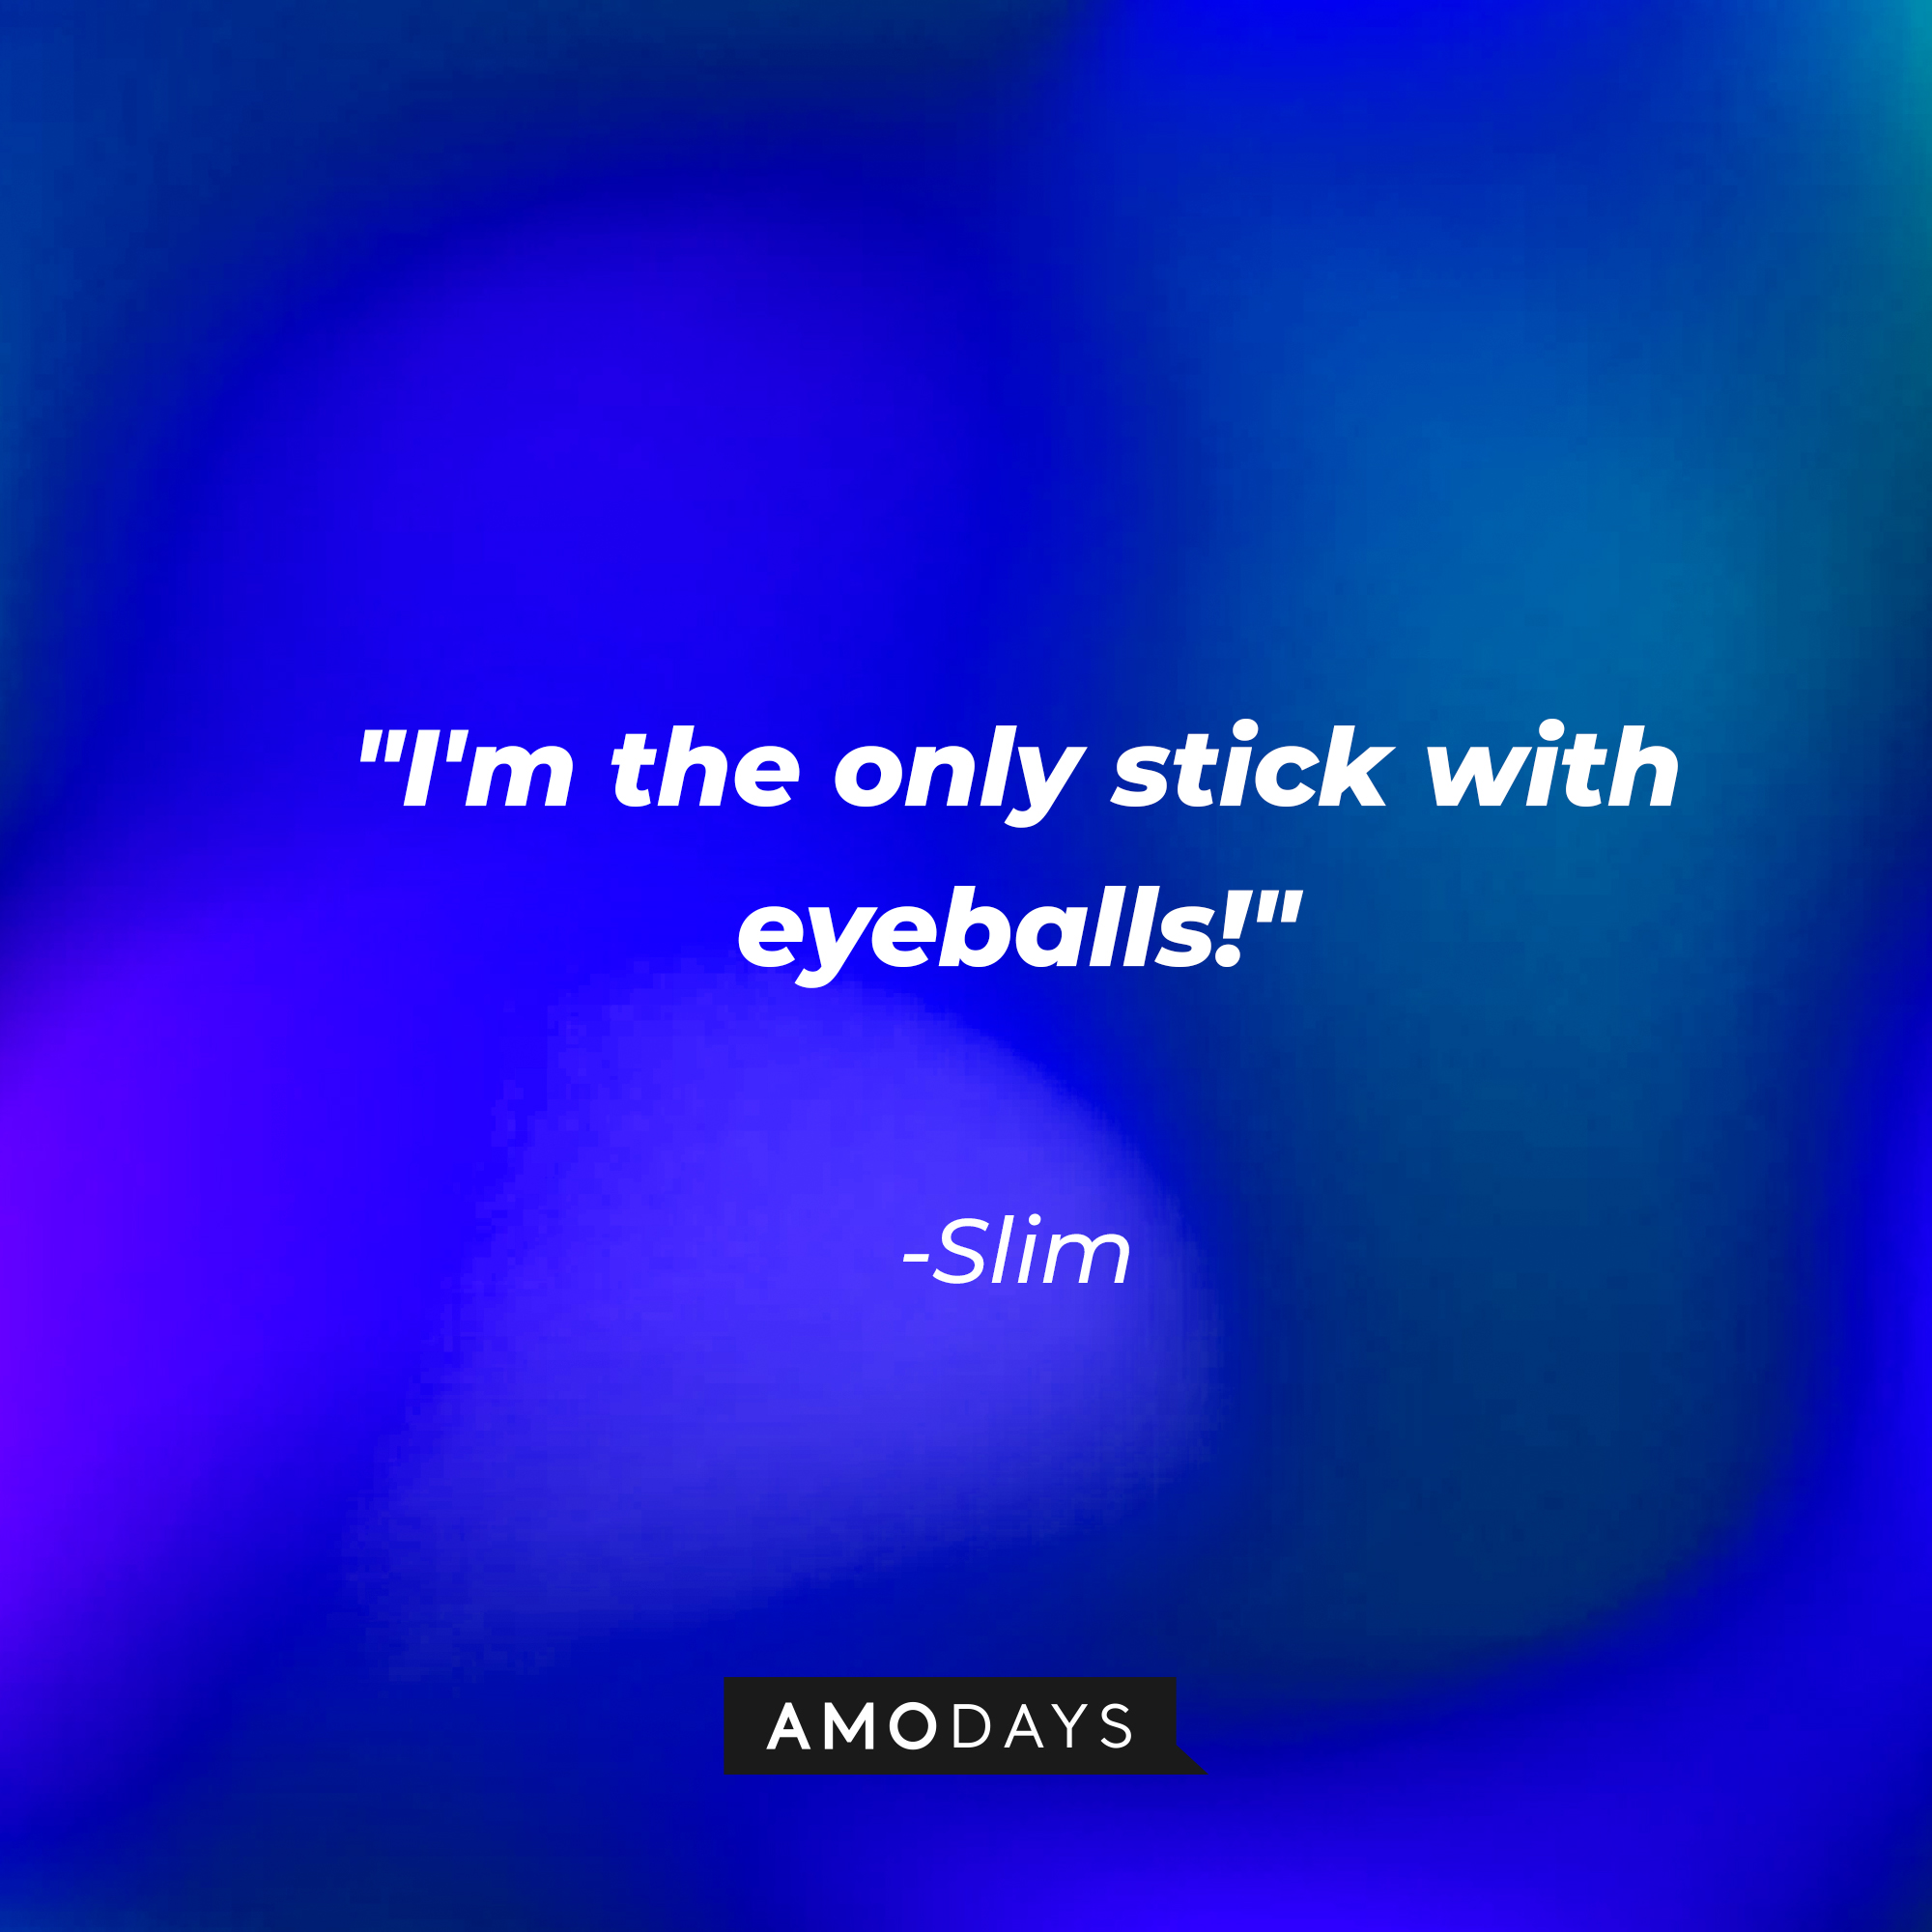 Slim's quote: "I'm the only stick with eyeballs!" | Source: AmoDays